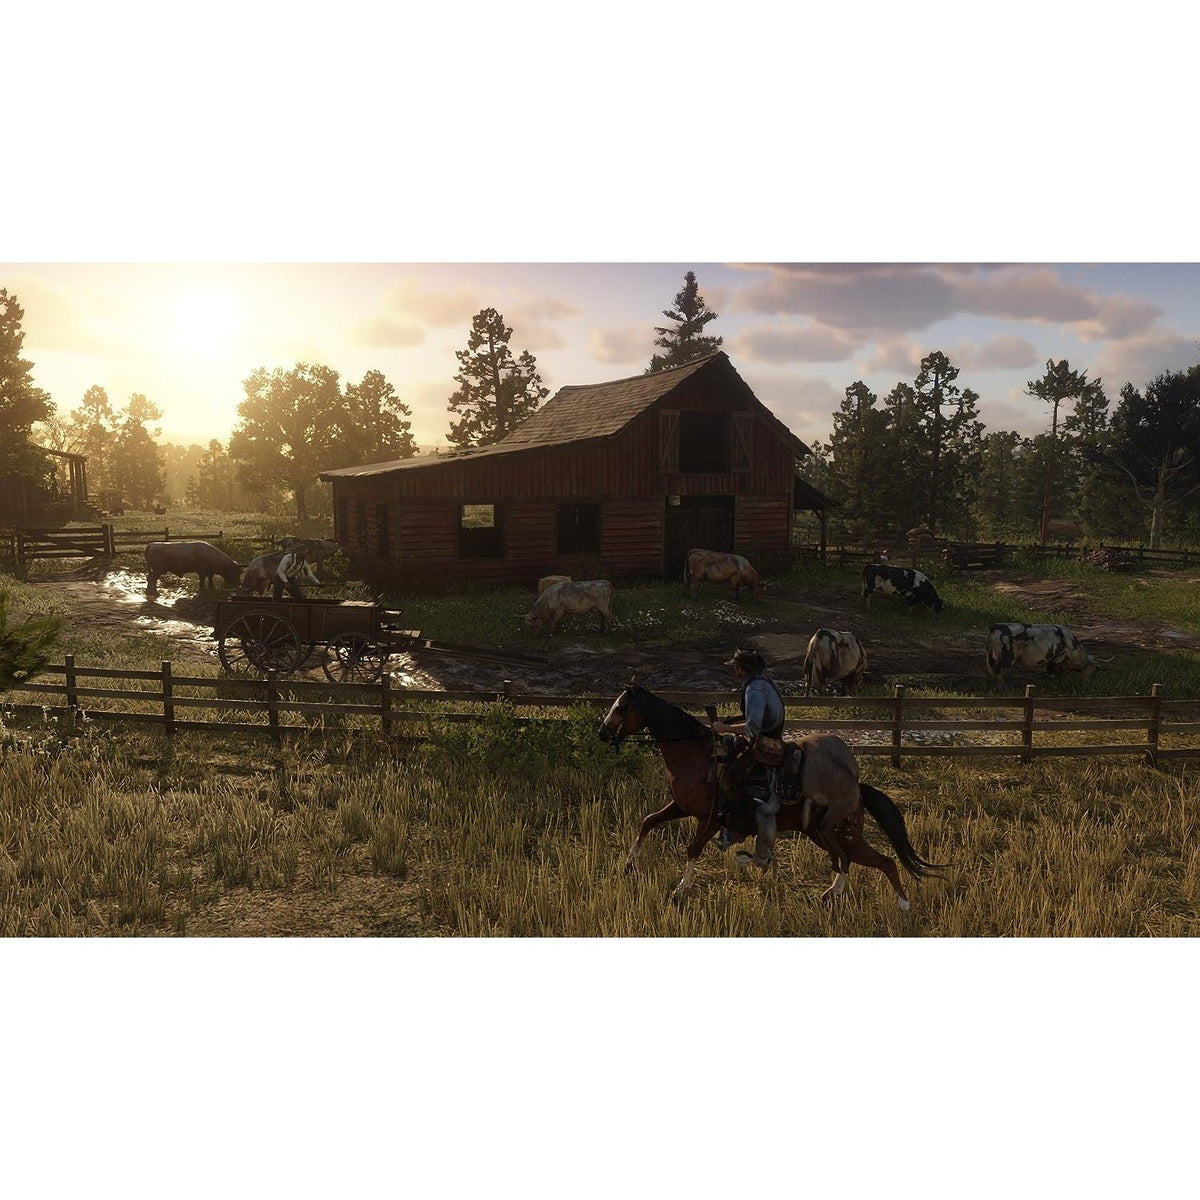 Red Dead Redemption 2 Sony PlayStation 4